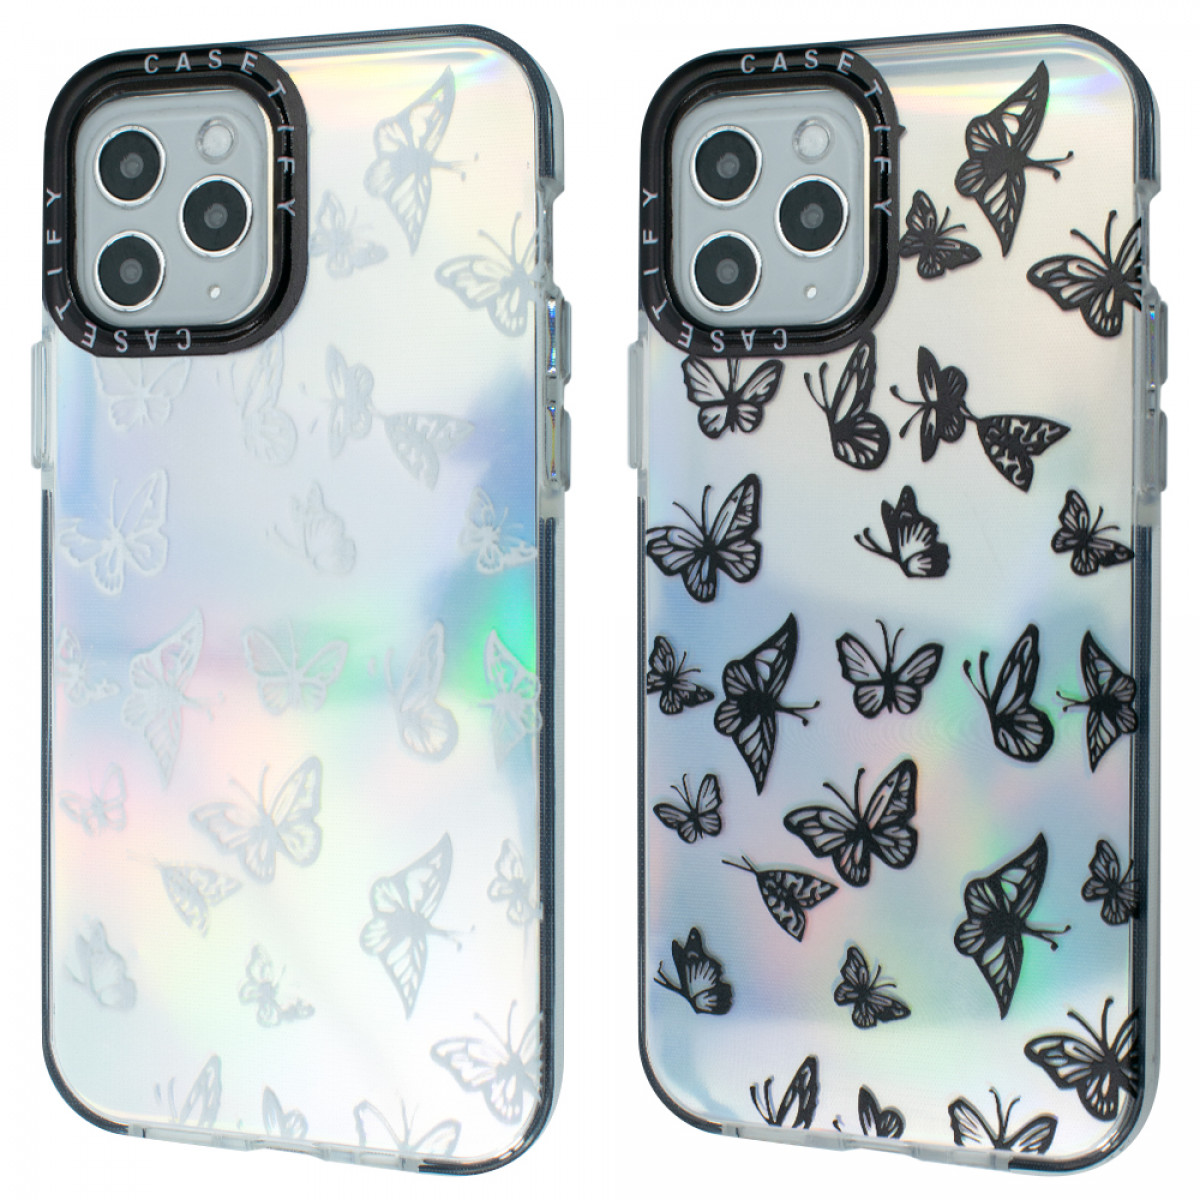 TPU Gradient Case Butterfly Apple Iphone 11 Pro Max